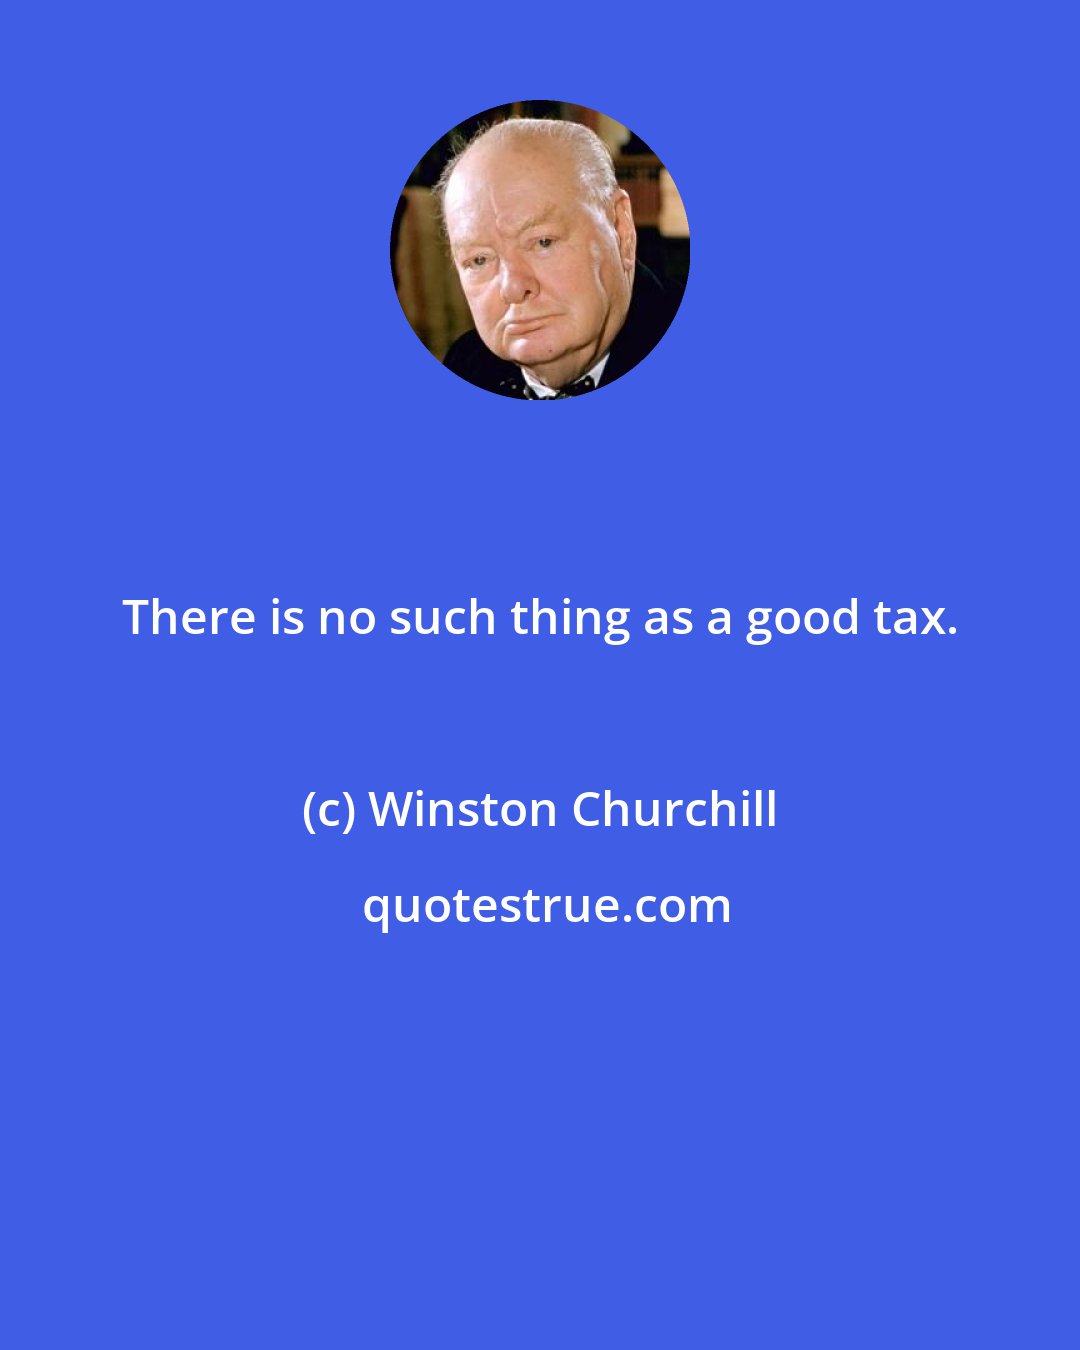 Winston Churchill: There is no such thing as a good tax.